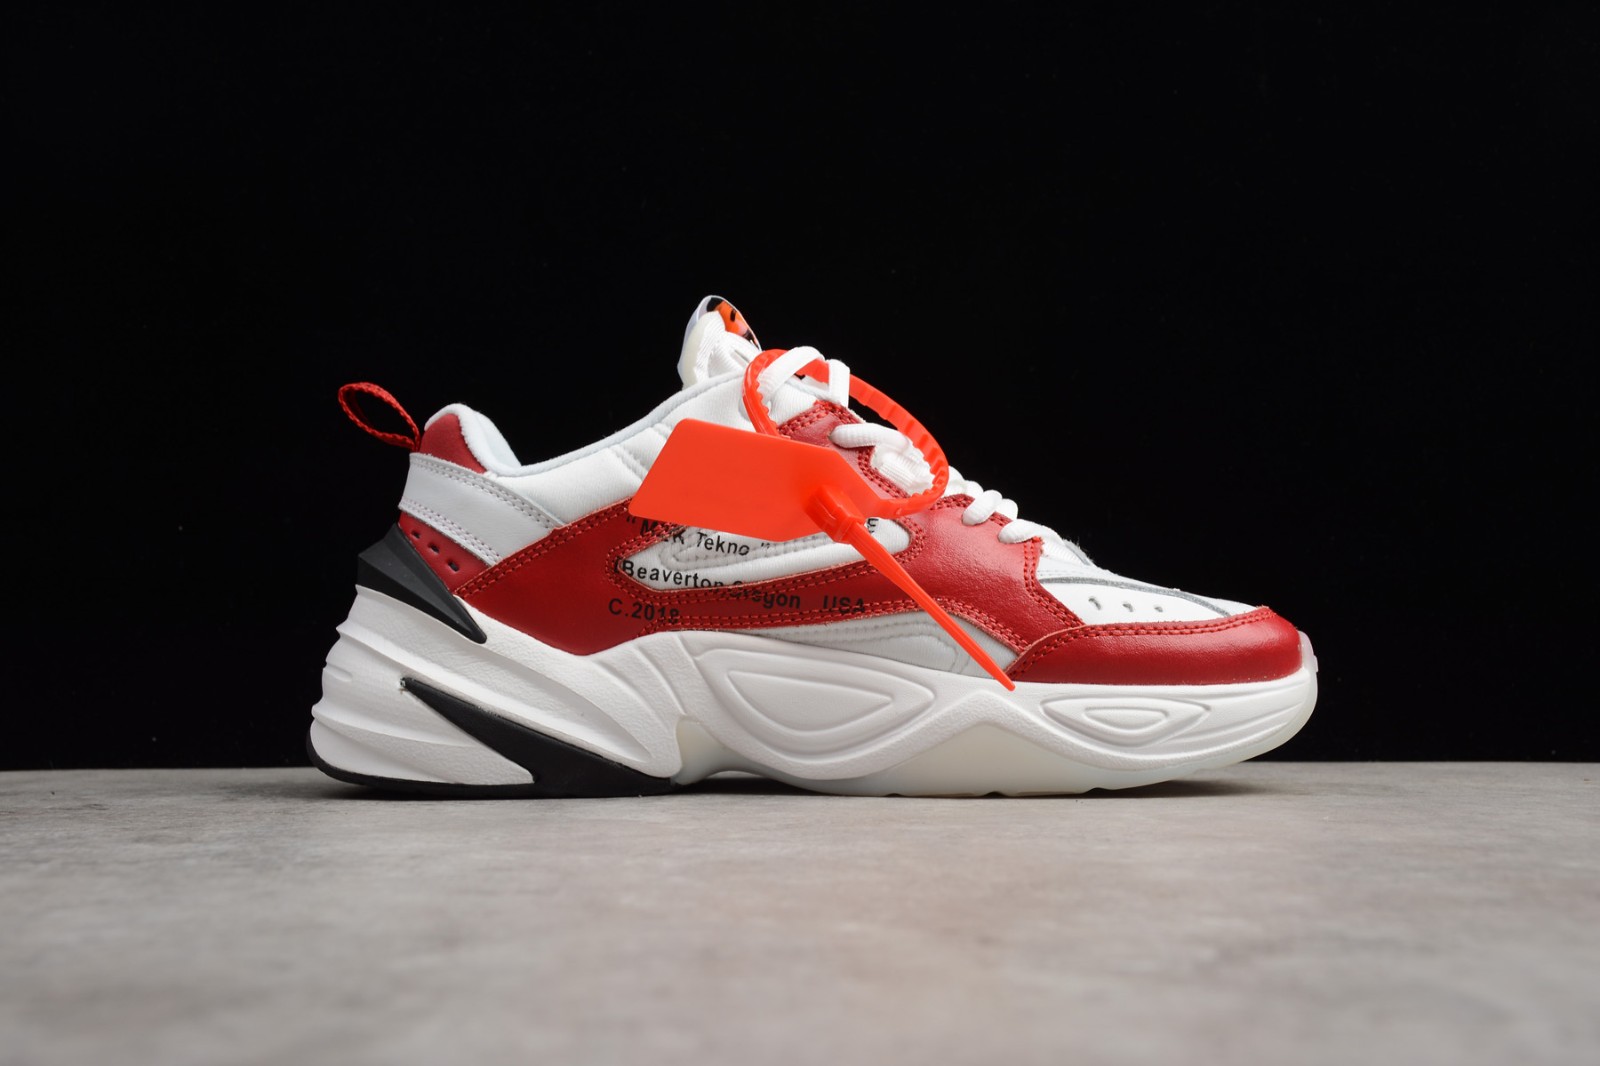 Becks Policía celestial 2018 Off White x Lite nike air zoom bb nxt china for sale Red White Black  A03108 060 - Lite nike air max 90 og infrared holiday - GmarShops